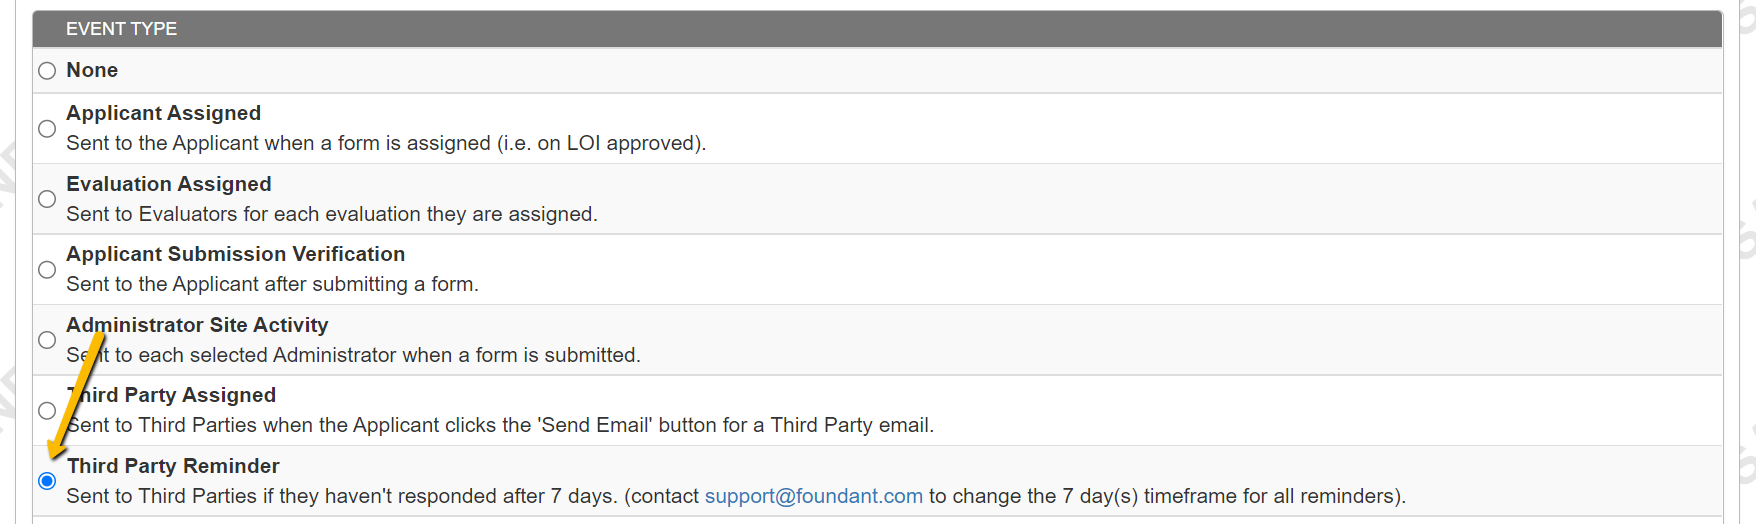 9.20.22_Build_Third_Party_Email_Templates_7.png